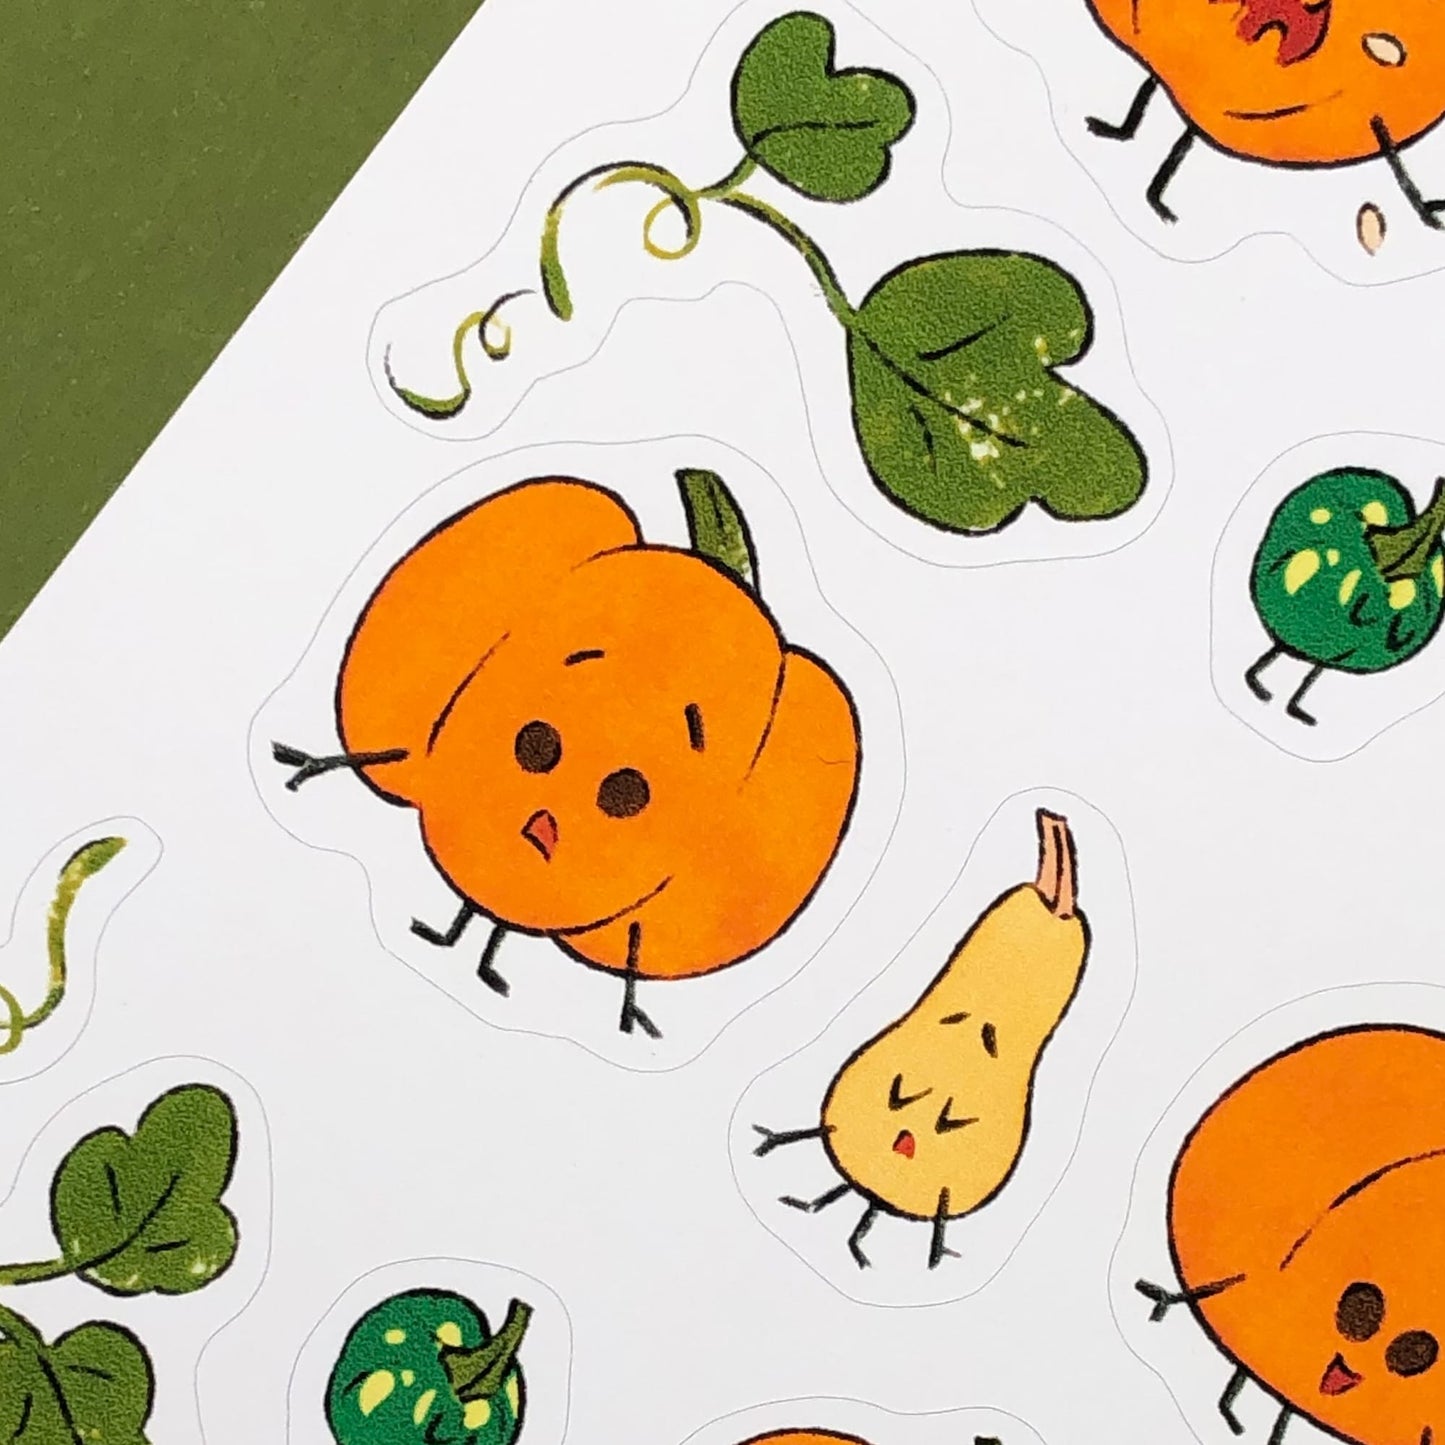 Illustrated pumpkins with expressions and leaves from a close view.